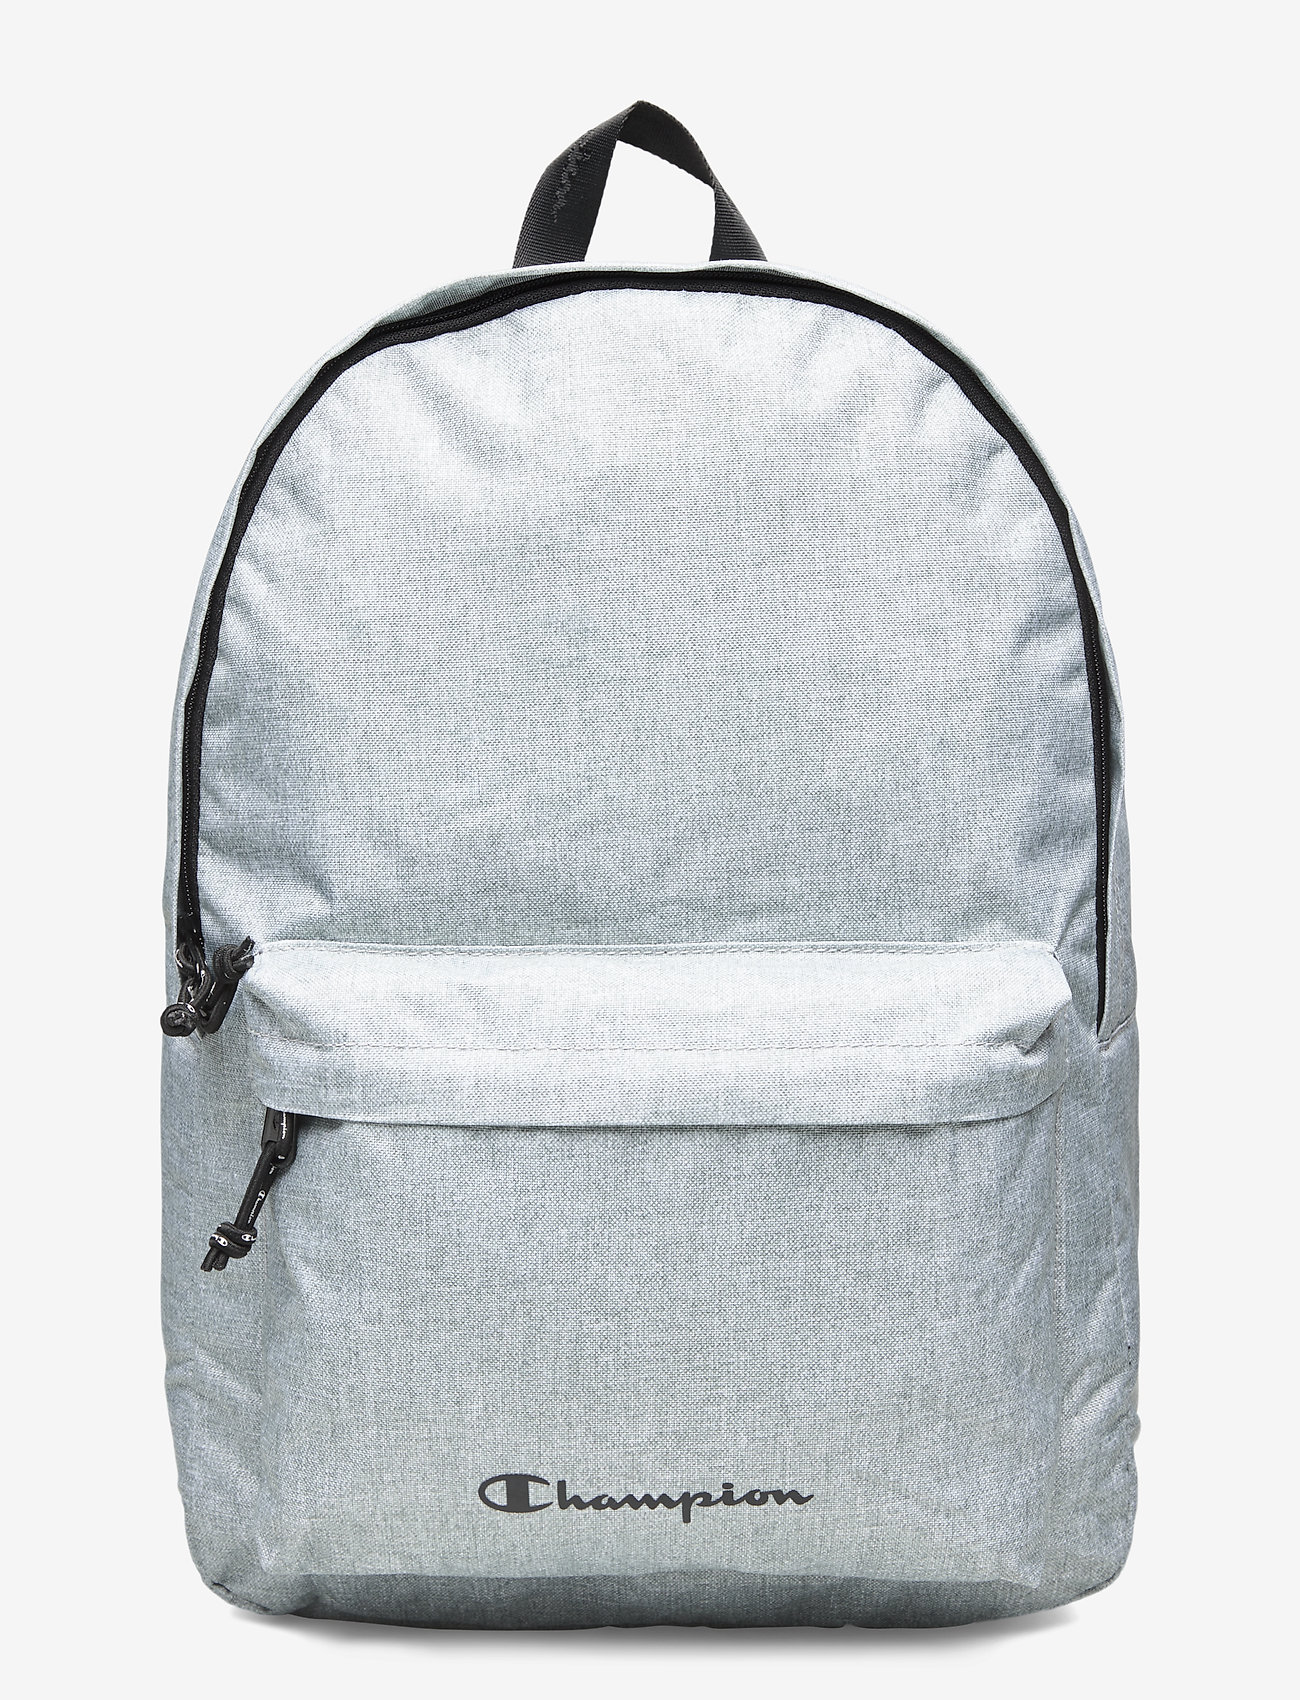 gray champion backpack